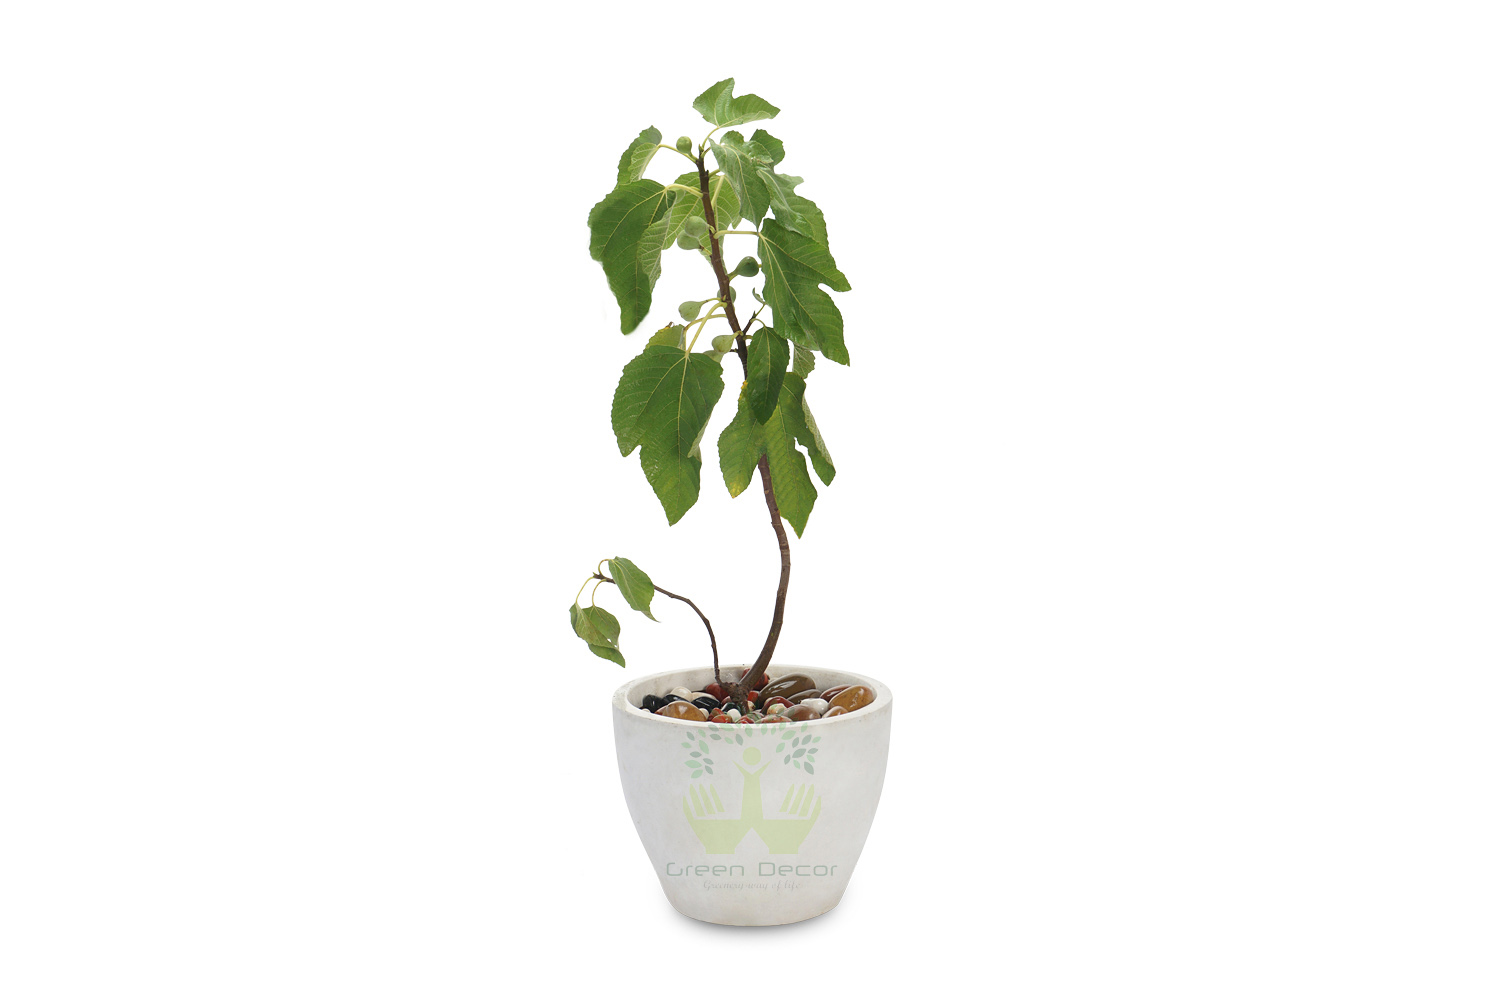 Buy Anjeer Plants , White Pots and seeds in Delhi NCR by the best online nursery shop Greendecor.